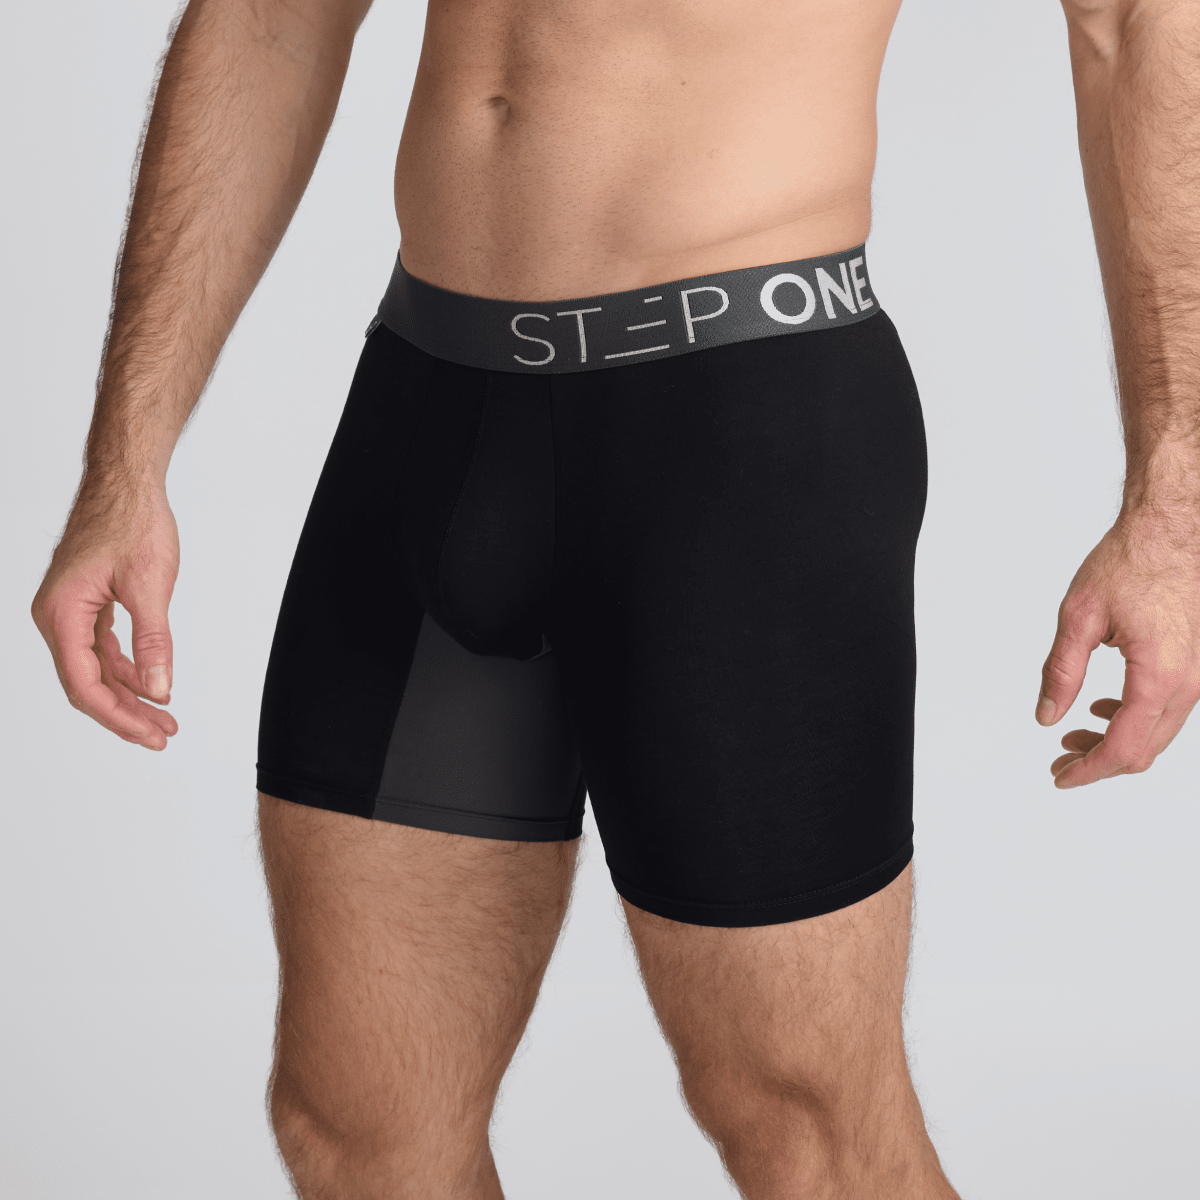 Men's Bamboo Underwear Boxers in black and grey